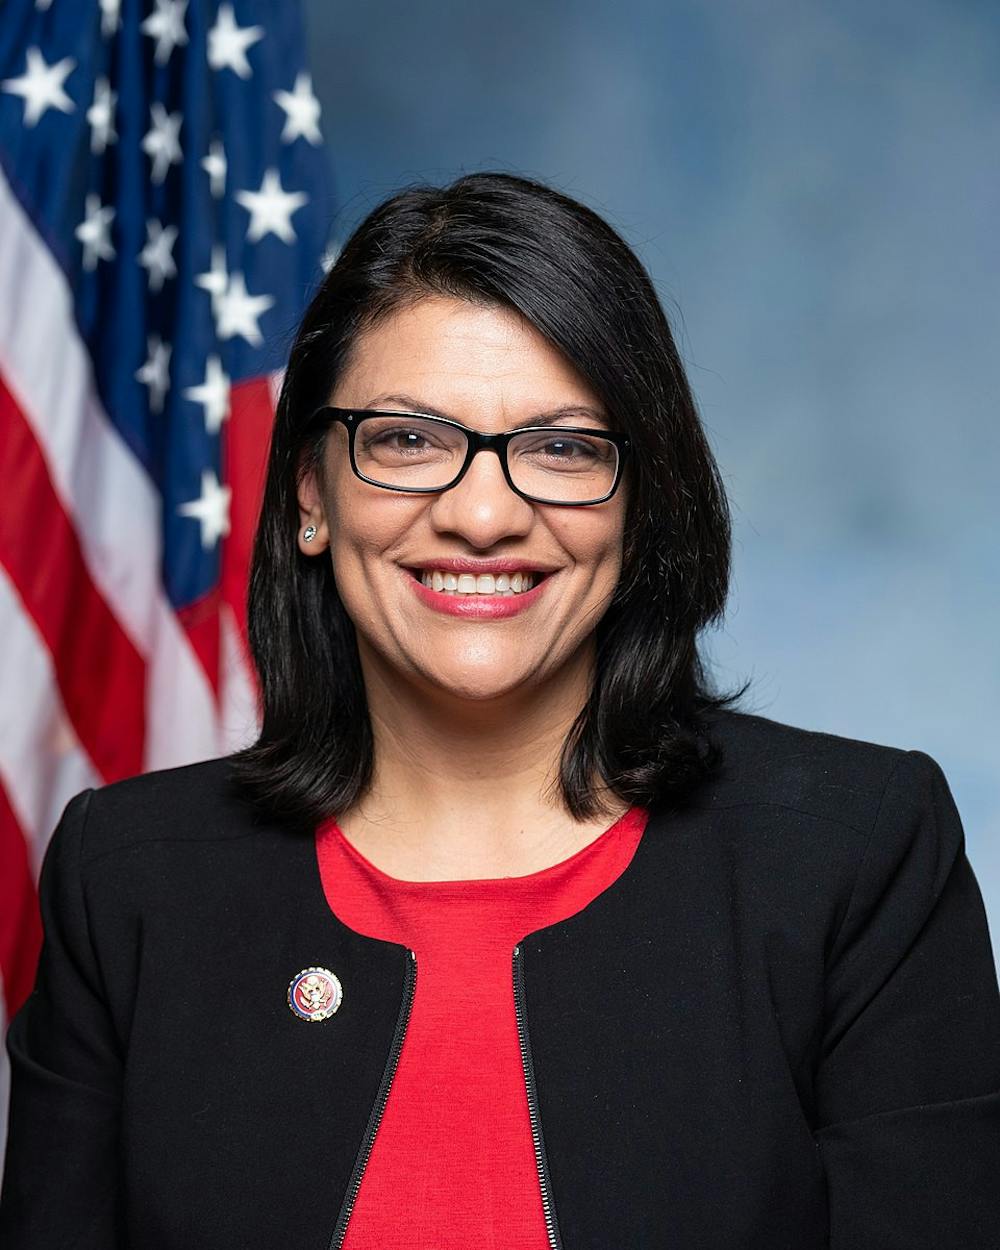 <p><em>In a seldom issued measure of rebuke, the U.S. House voted on Nov. 7 to censure Congresswoman Rashida Tlaib for her remarks on the ongoing Israel-Palestine war (Photo courtesy of Wikimedia Commons/“</em><a href="https://commons.wikimedia.org/wiki/File:Rashida_Tlaib,_official_portrait,_116th_Congress.jpg" target=""><em>Rashida Tlaib, official portrait, 116th Congress</em></a><em>” by the United States Congress. January 3, 2019). </em></p>